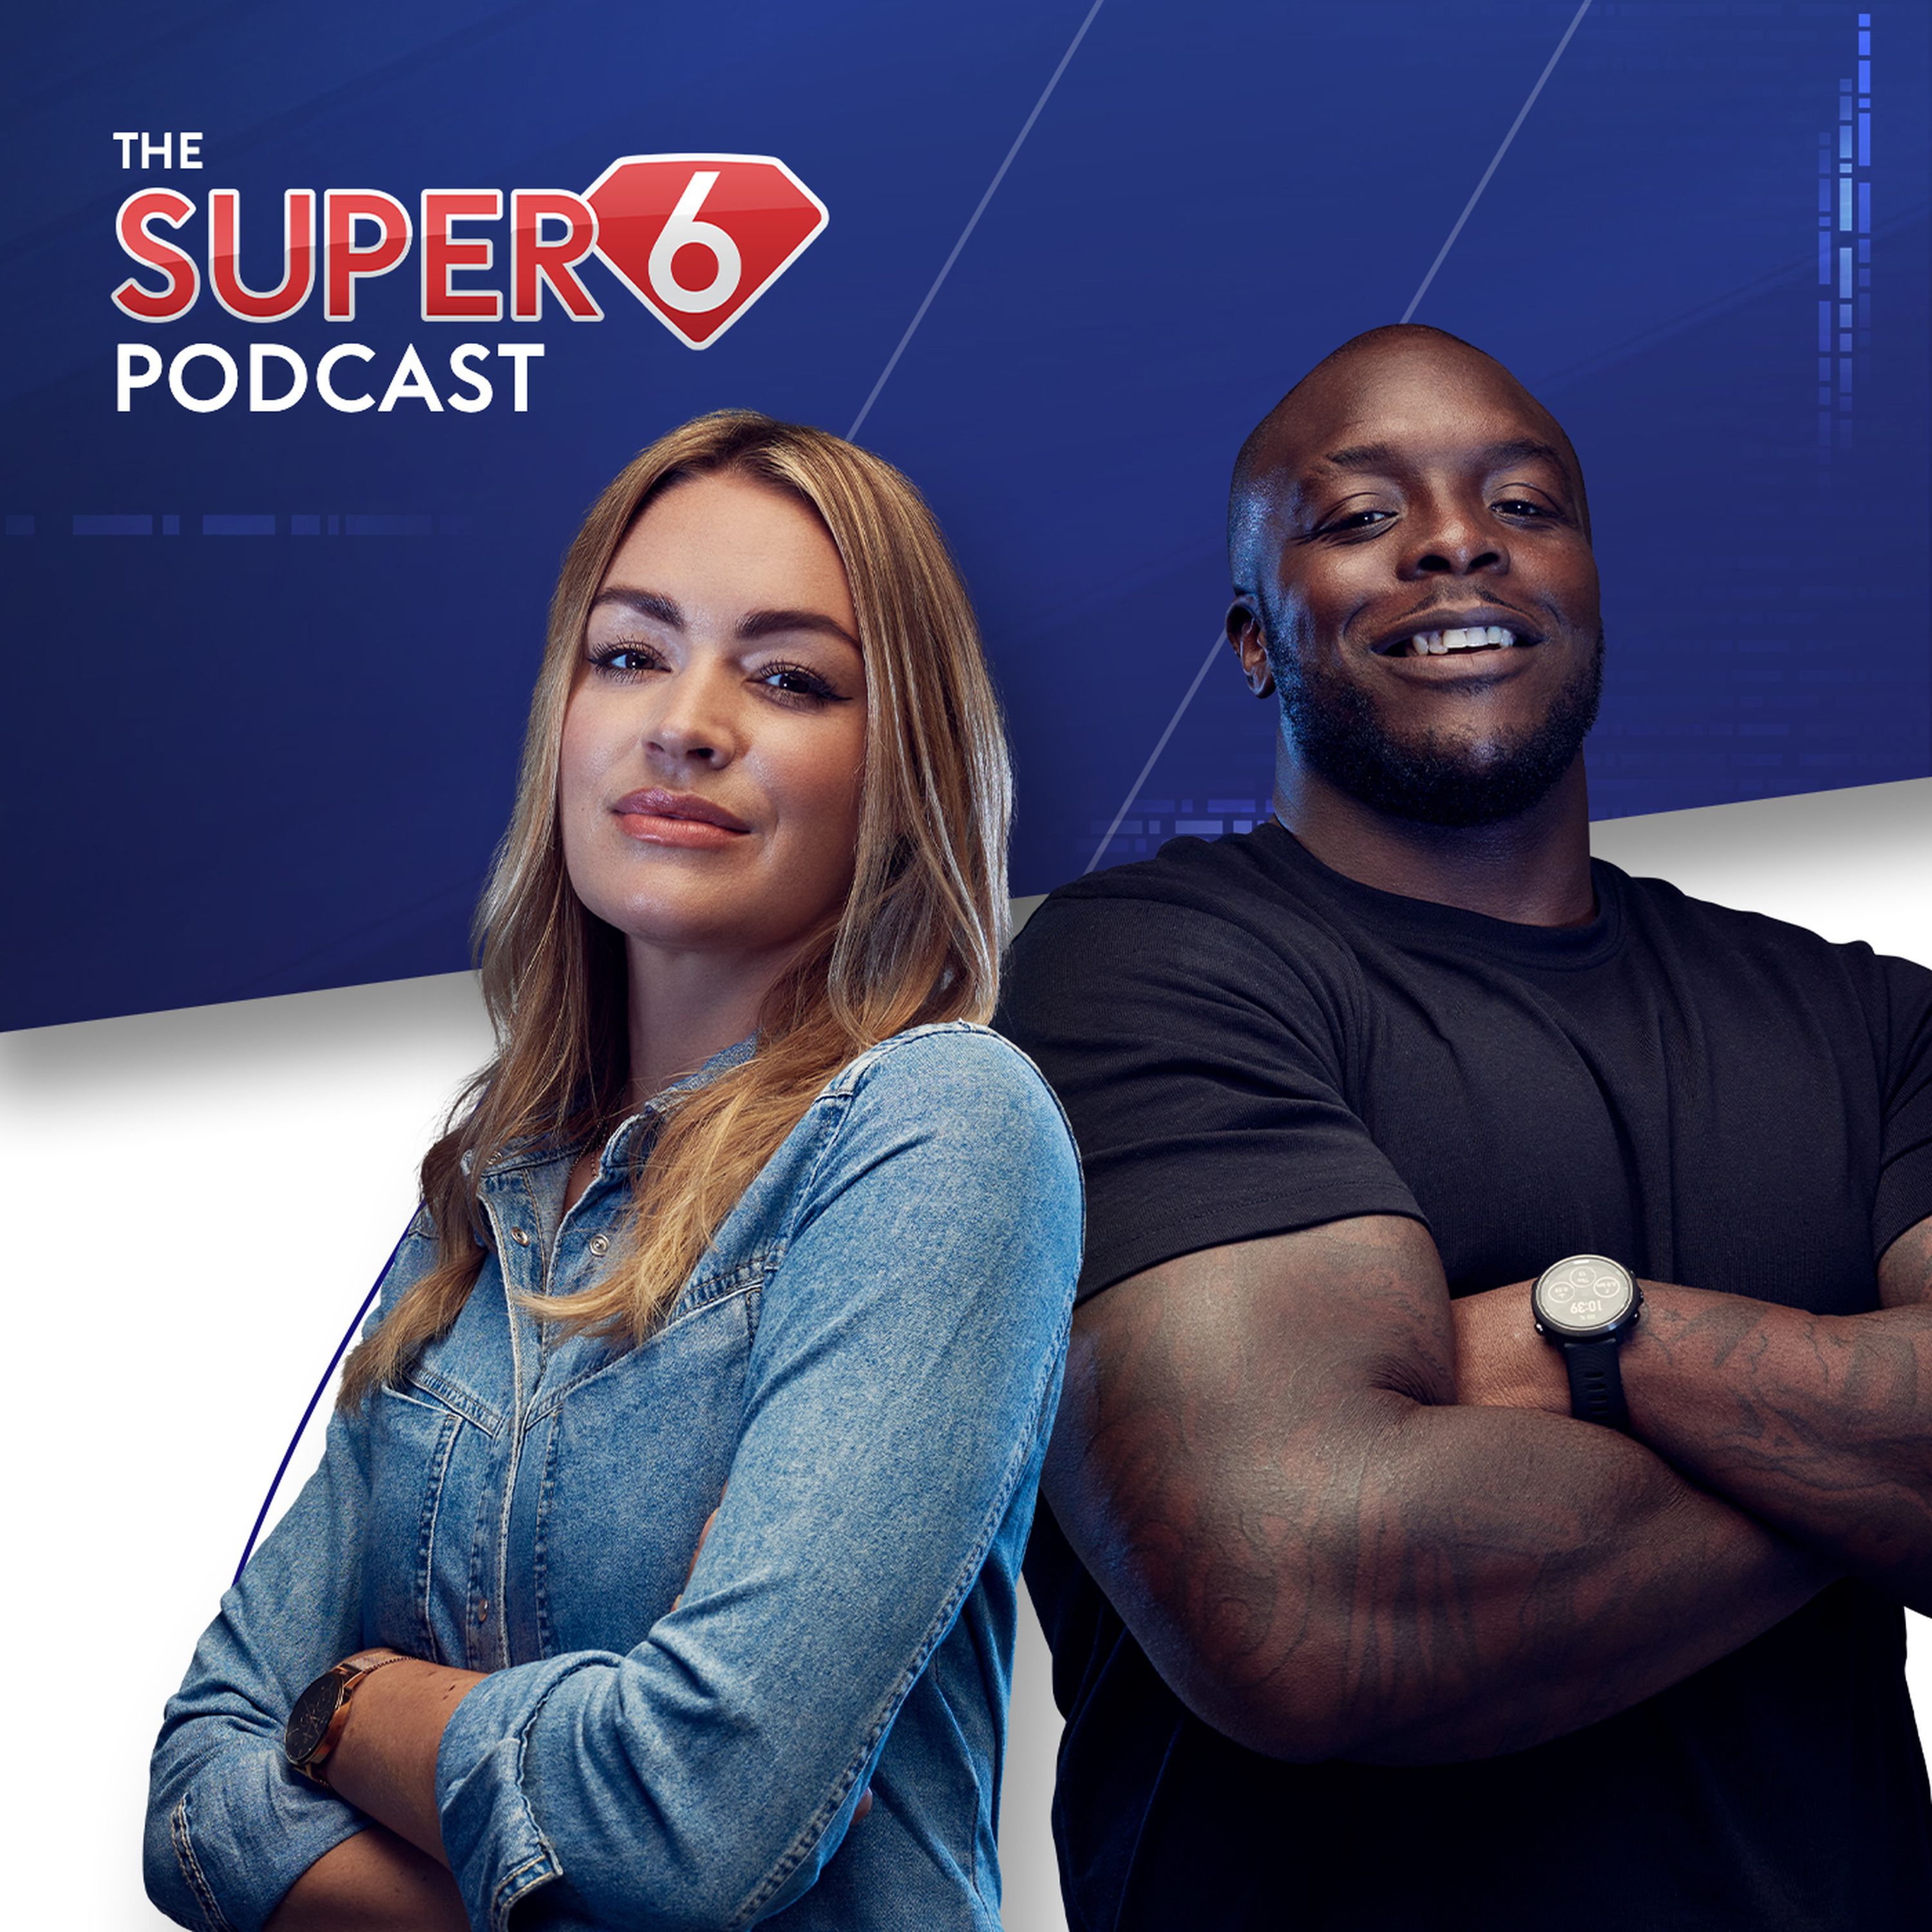 Jimmy Bullard joins! From the JJB to the Jungle and the John Arne Riise | Super 6 Podcast Episode 14